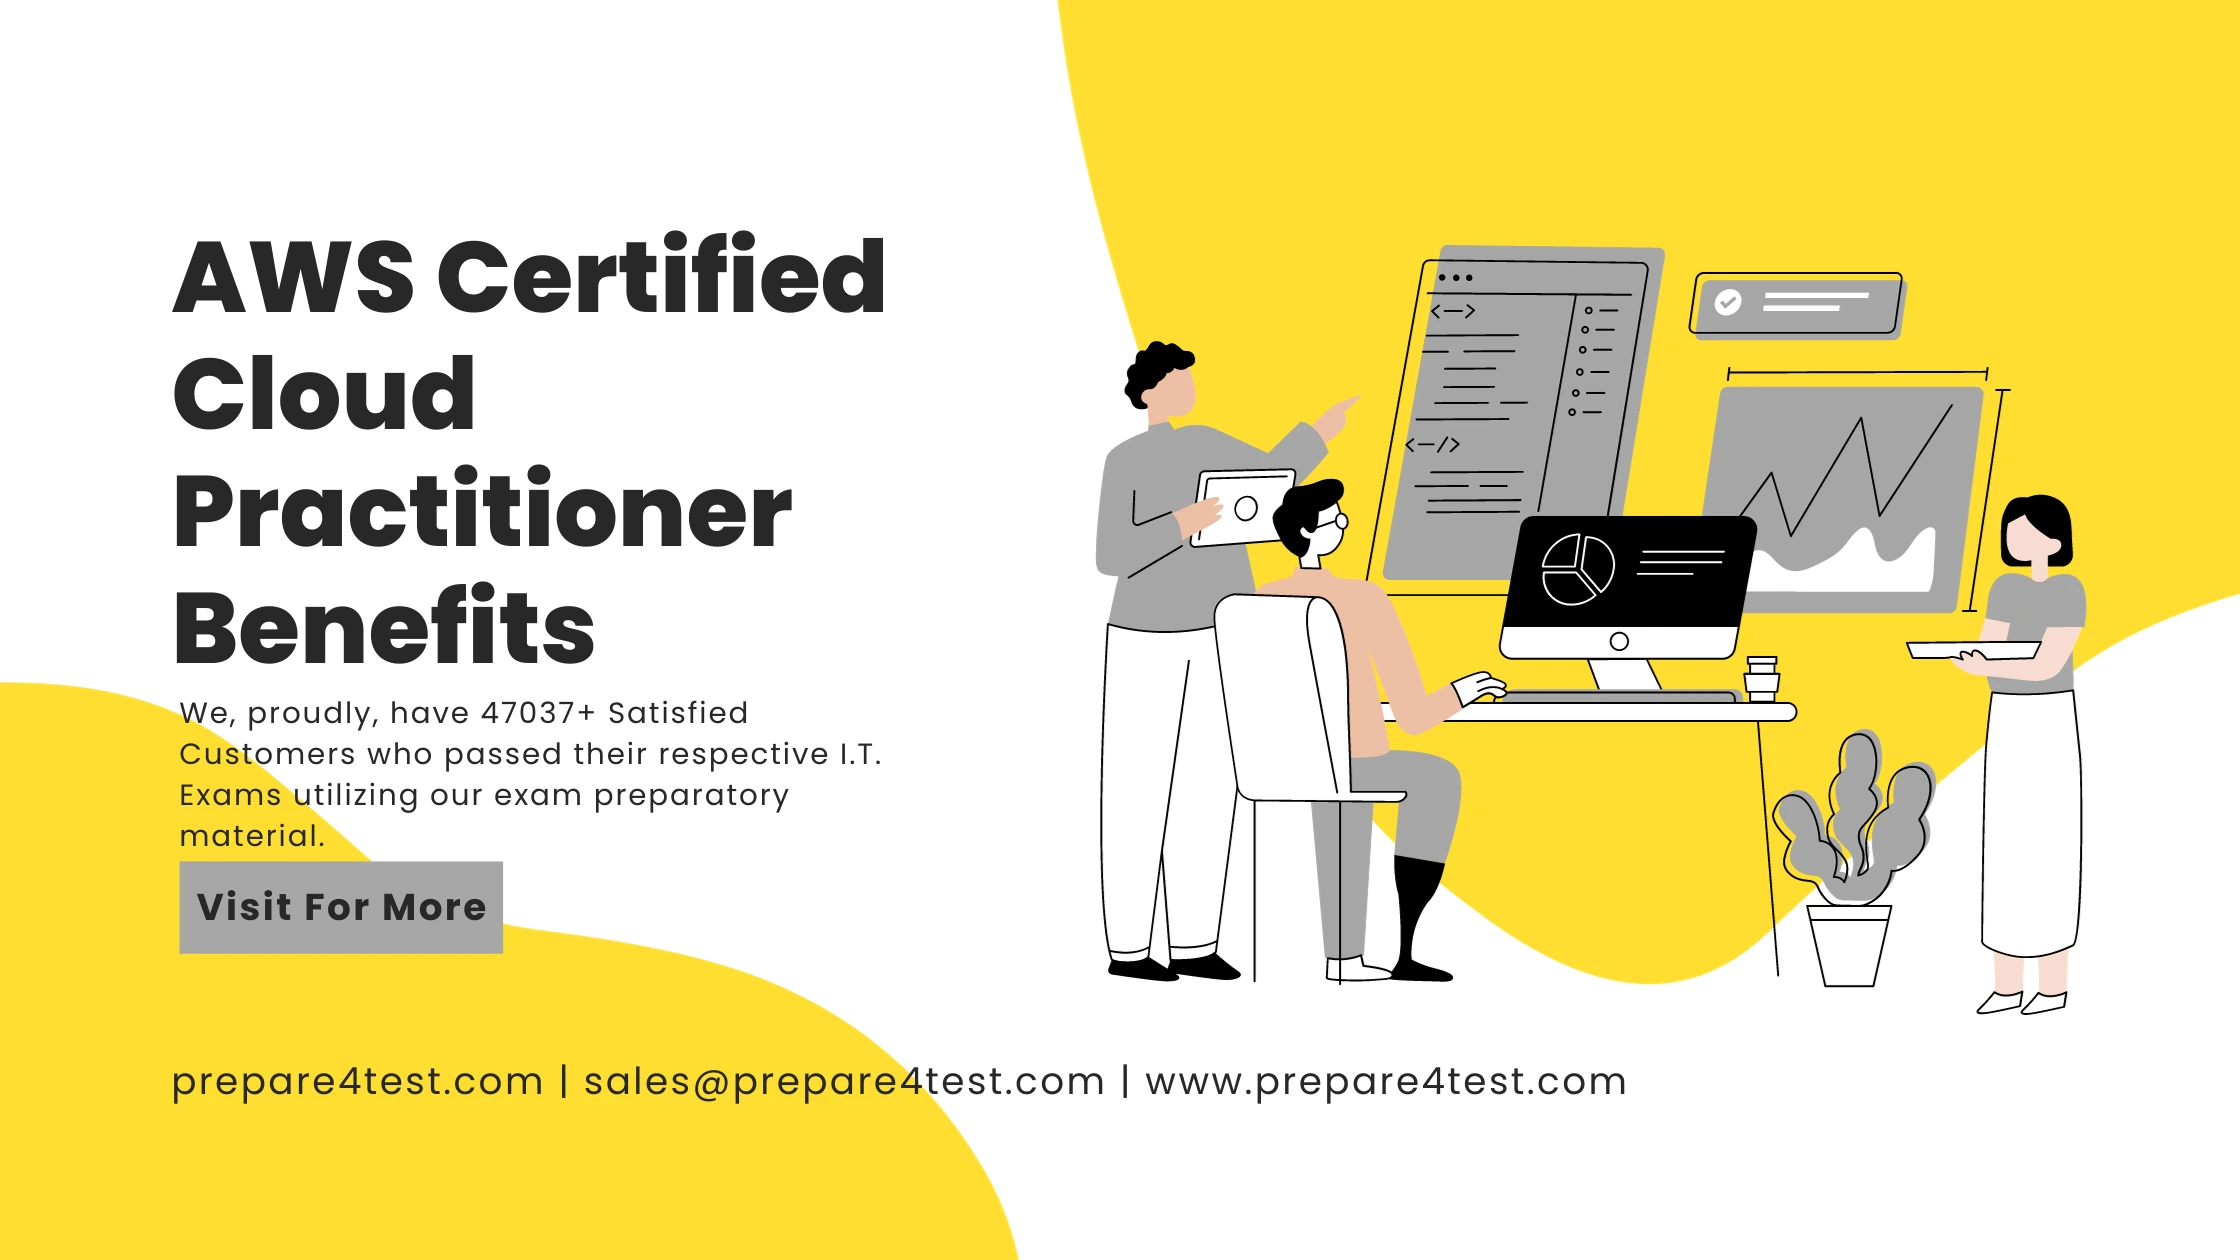 AWS Certified Cloud Practitioner Benefits